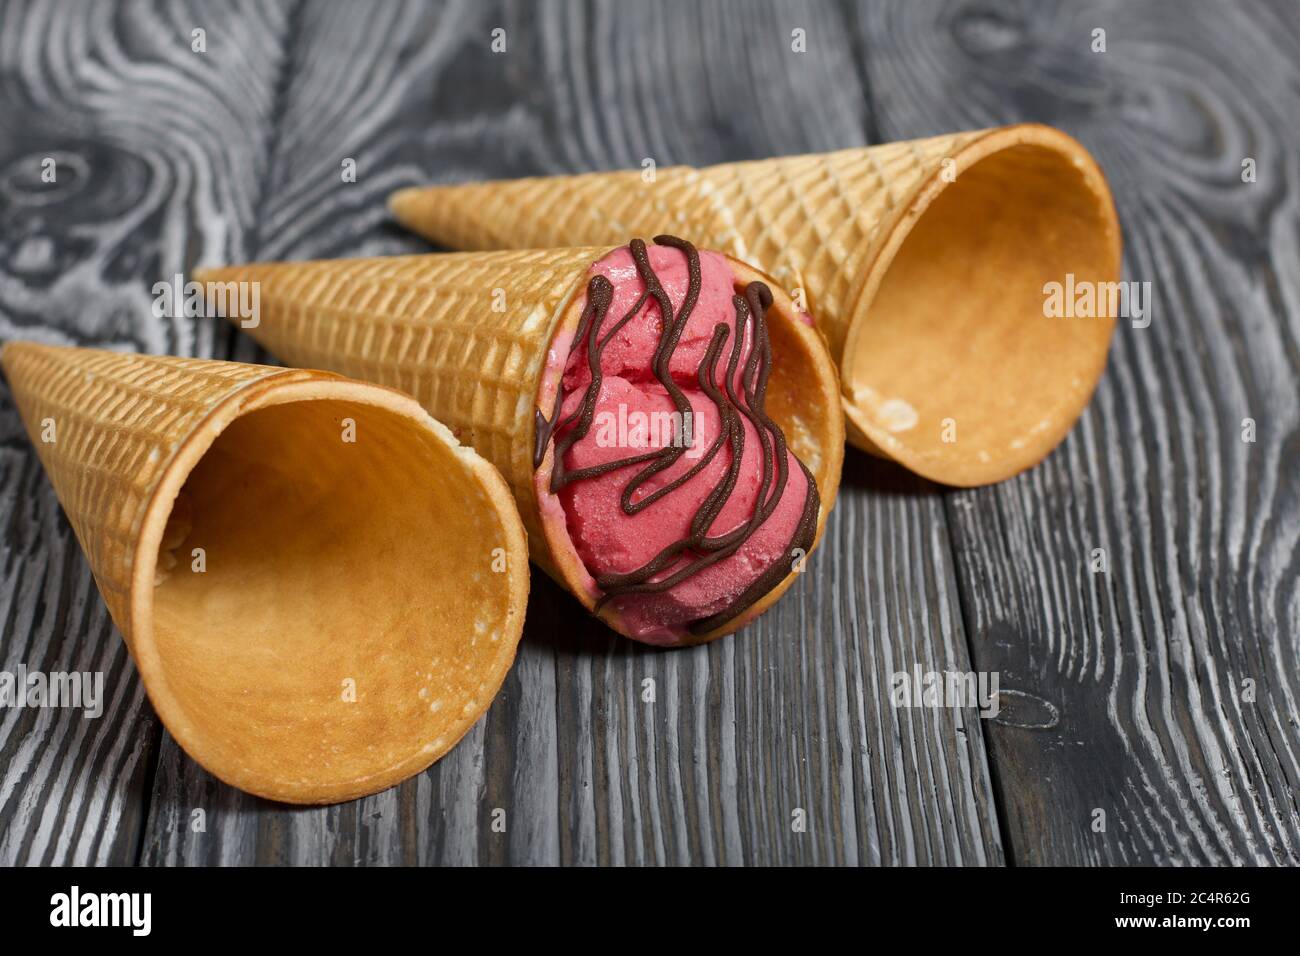 Strawberry ice cream in a waffle cone. Garnished with Chocolate. Nearby are empty waffle cones without ice cream. On pine boards painted in black and Stock Photo